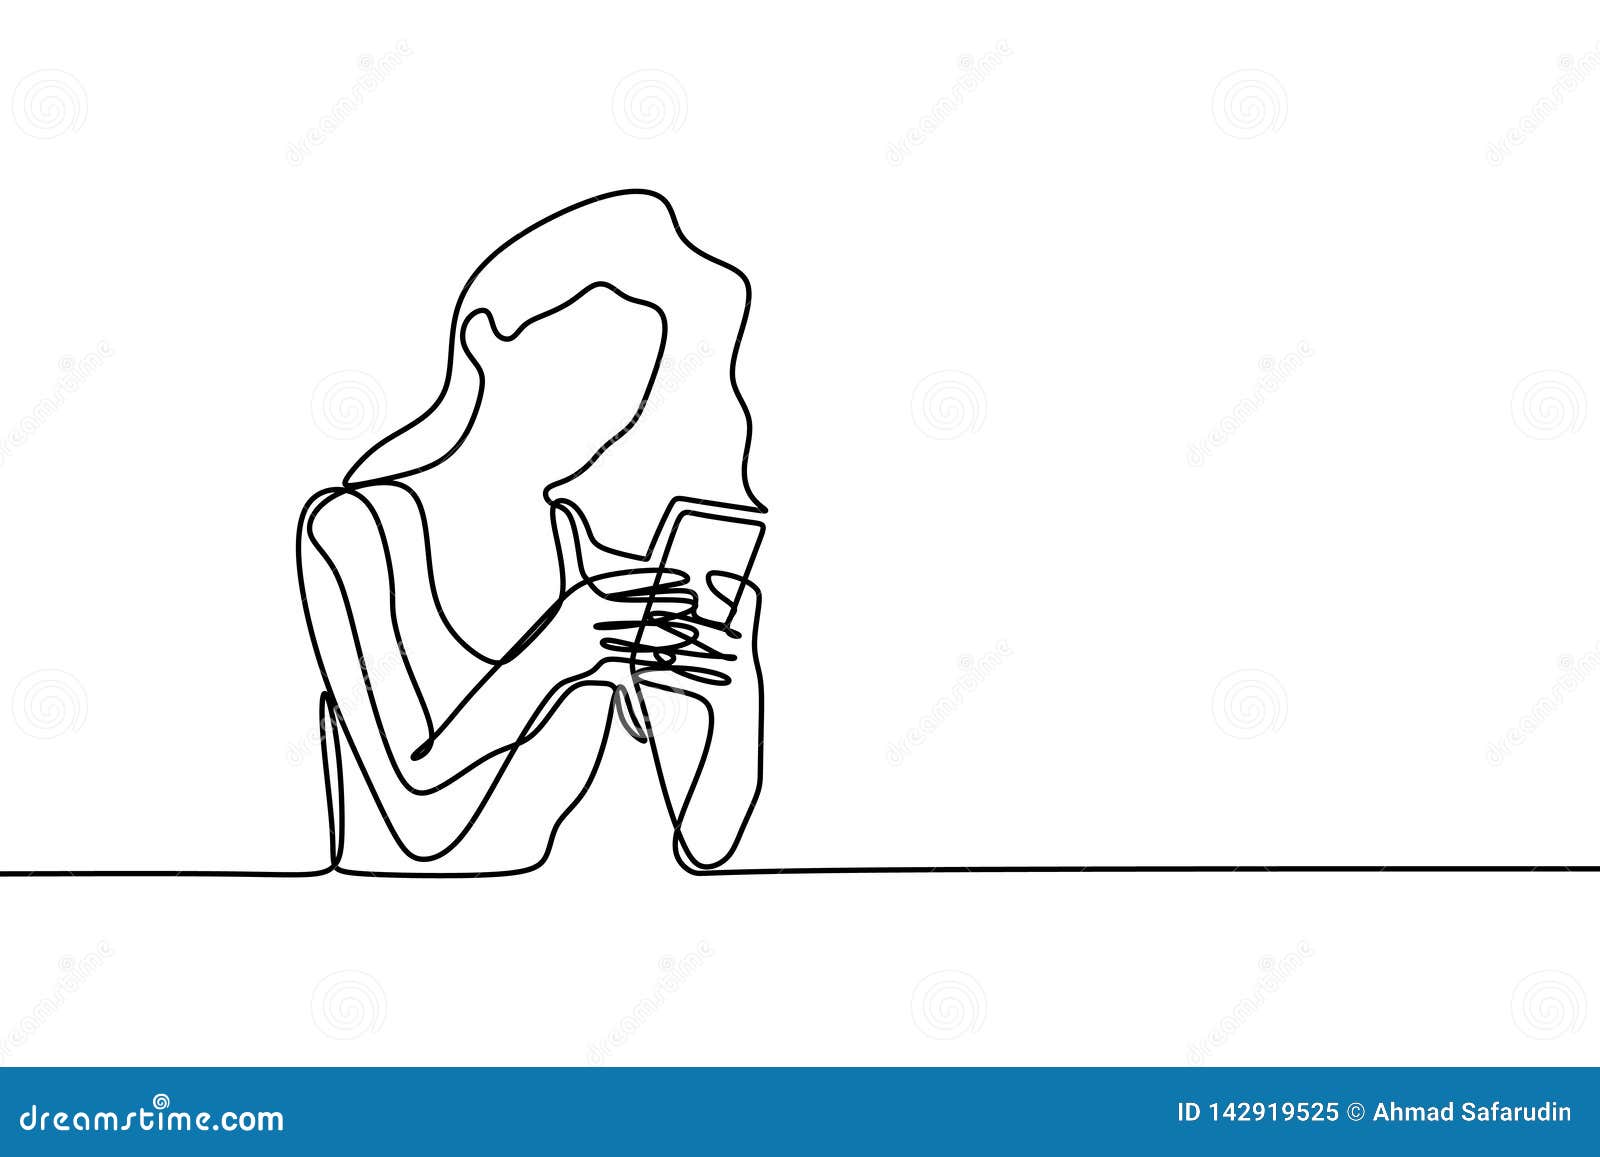 Continuous One Line Drawing Of Girl Playing And Using